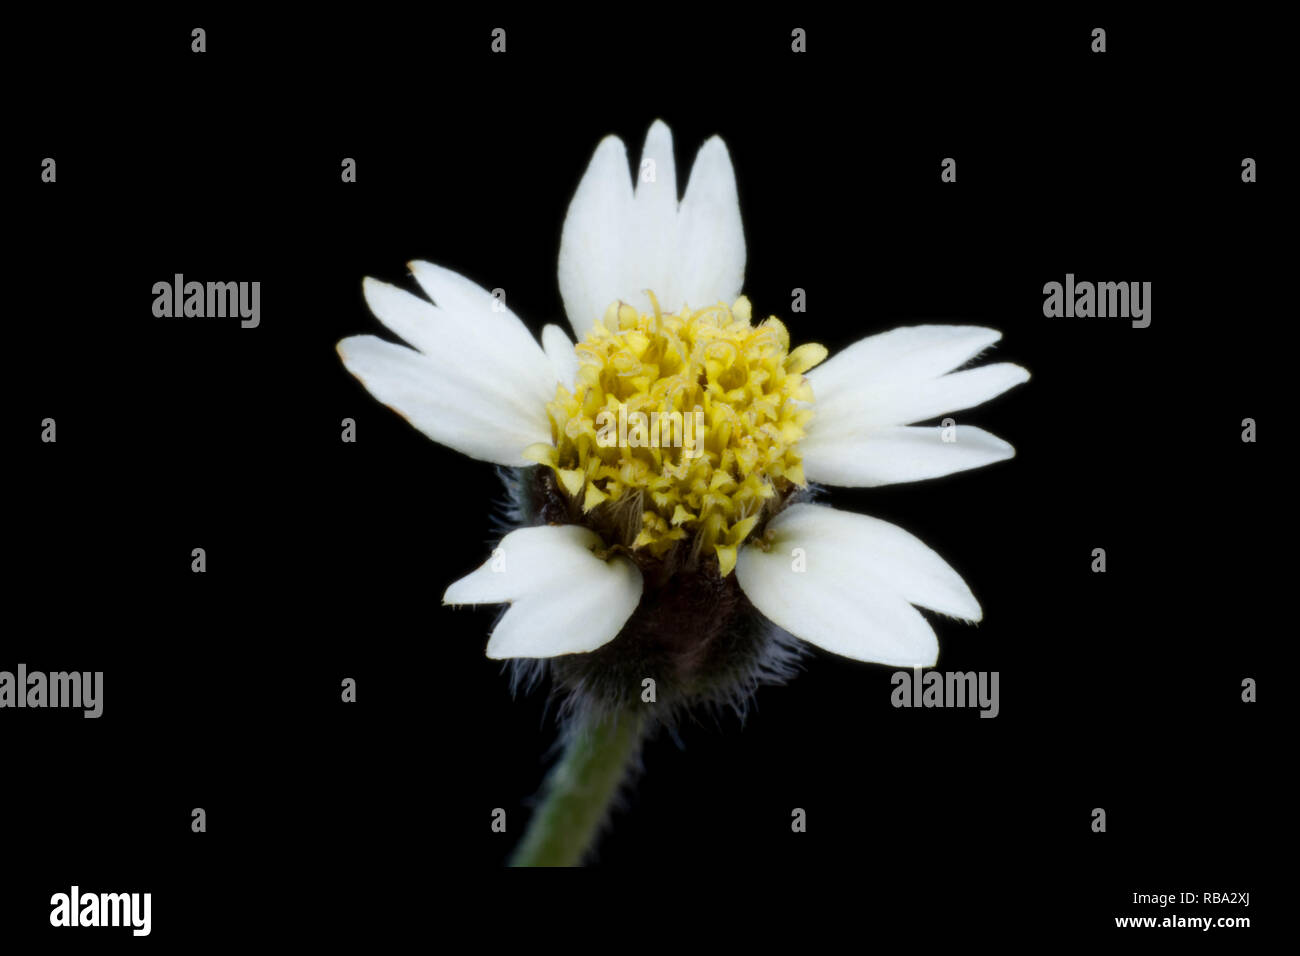 Mexican daisy or Tridax flower on dark background Stock Photo